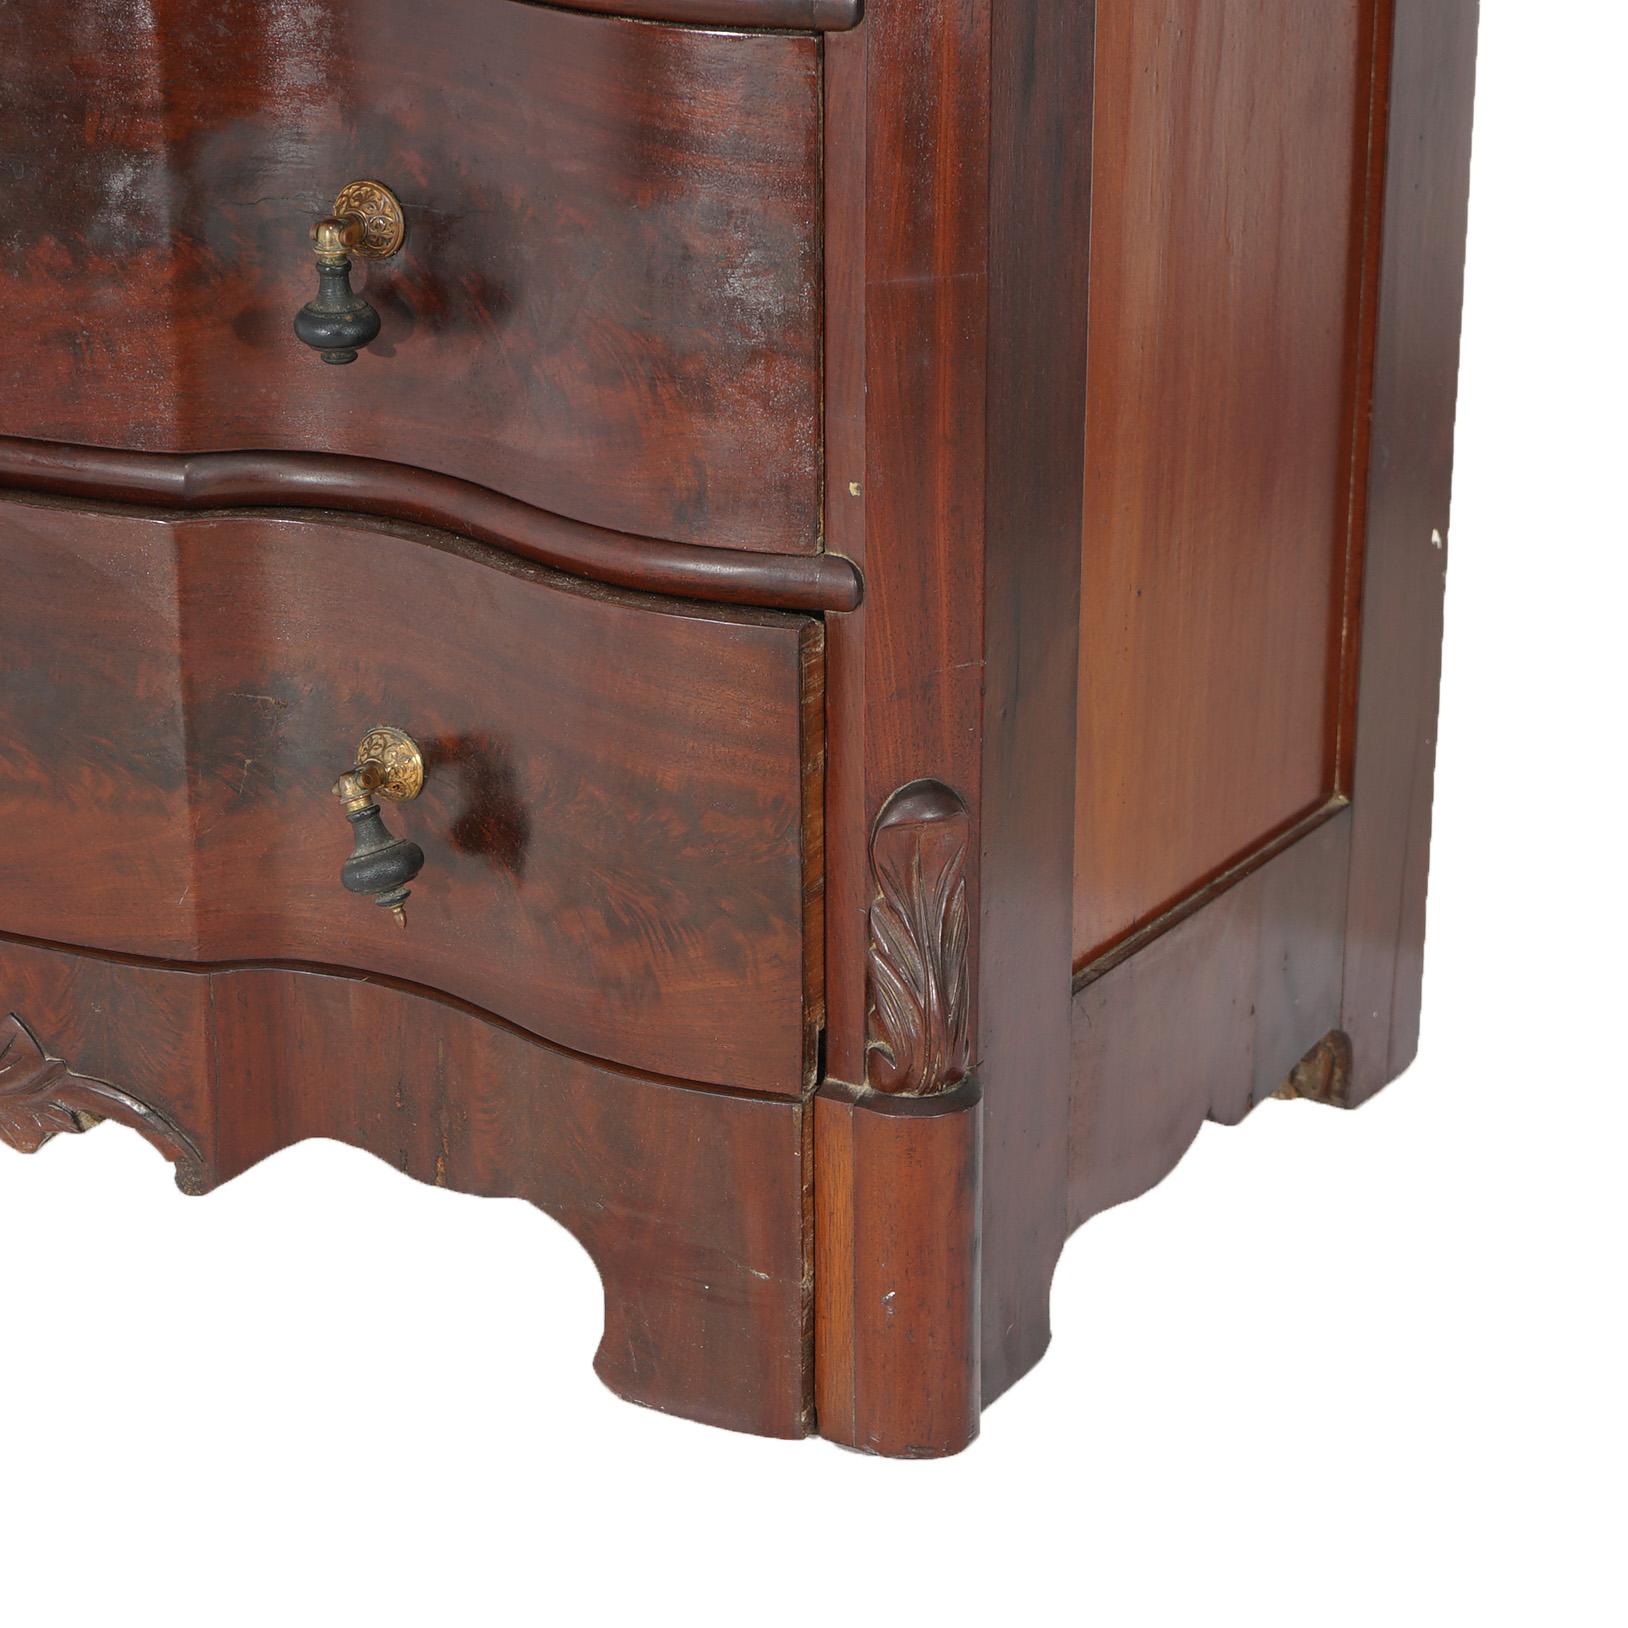 Beveled Antique Victorian Flame Mahogany Swell Front Mirrored Chest of Drawers c1860 For Sale